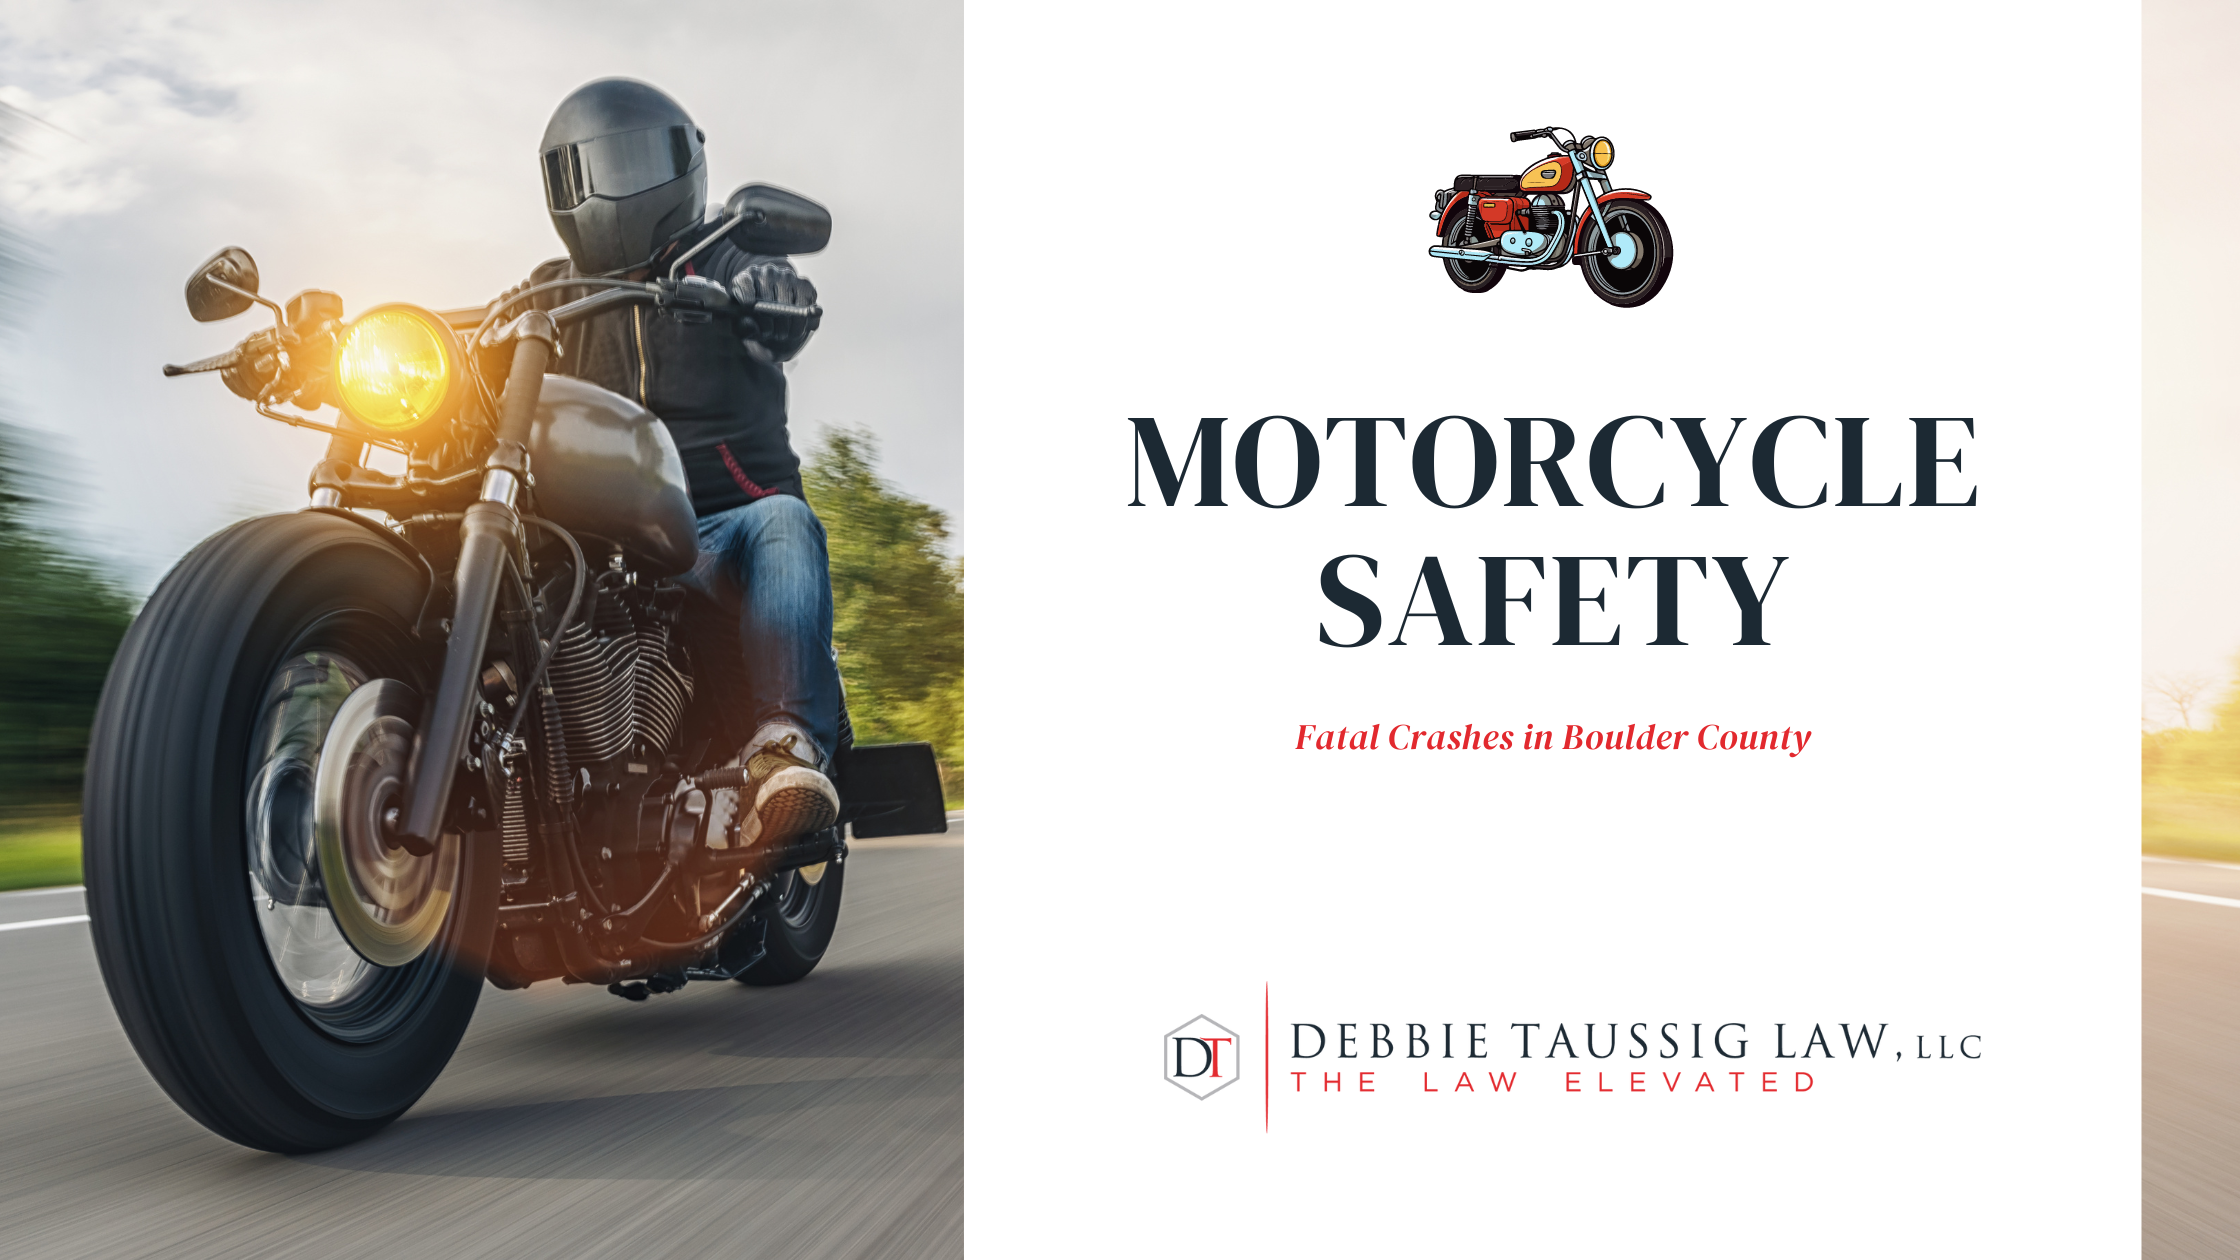 Motorcycle Safety: Fatal Crashes in Boulder County